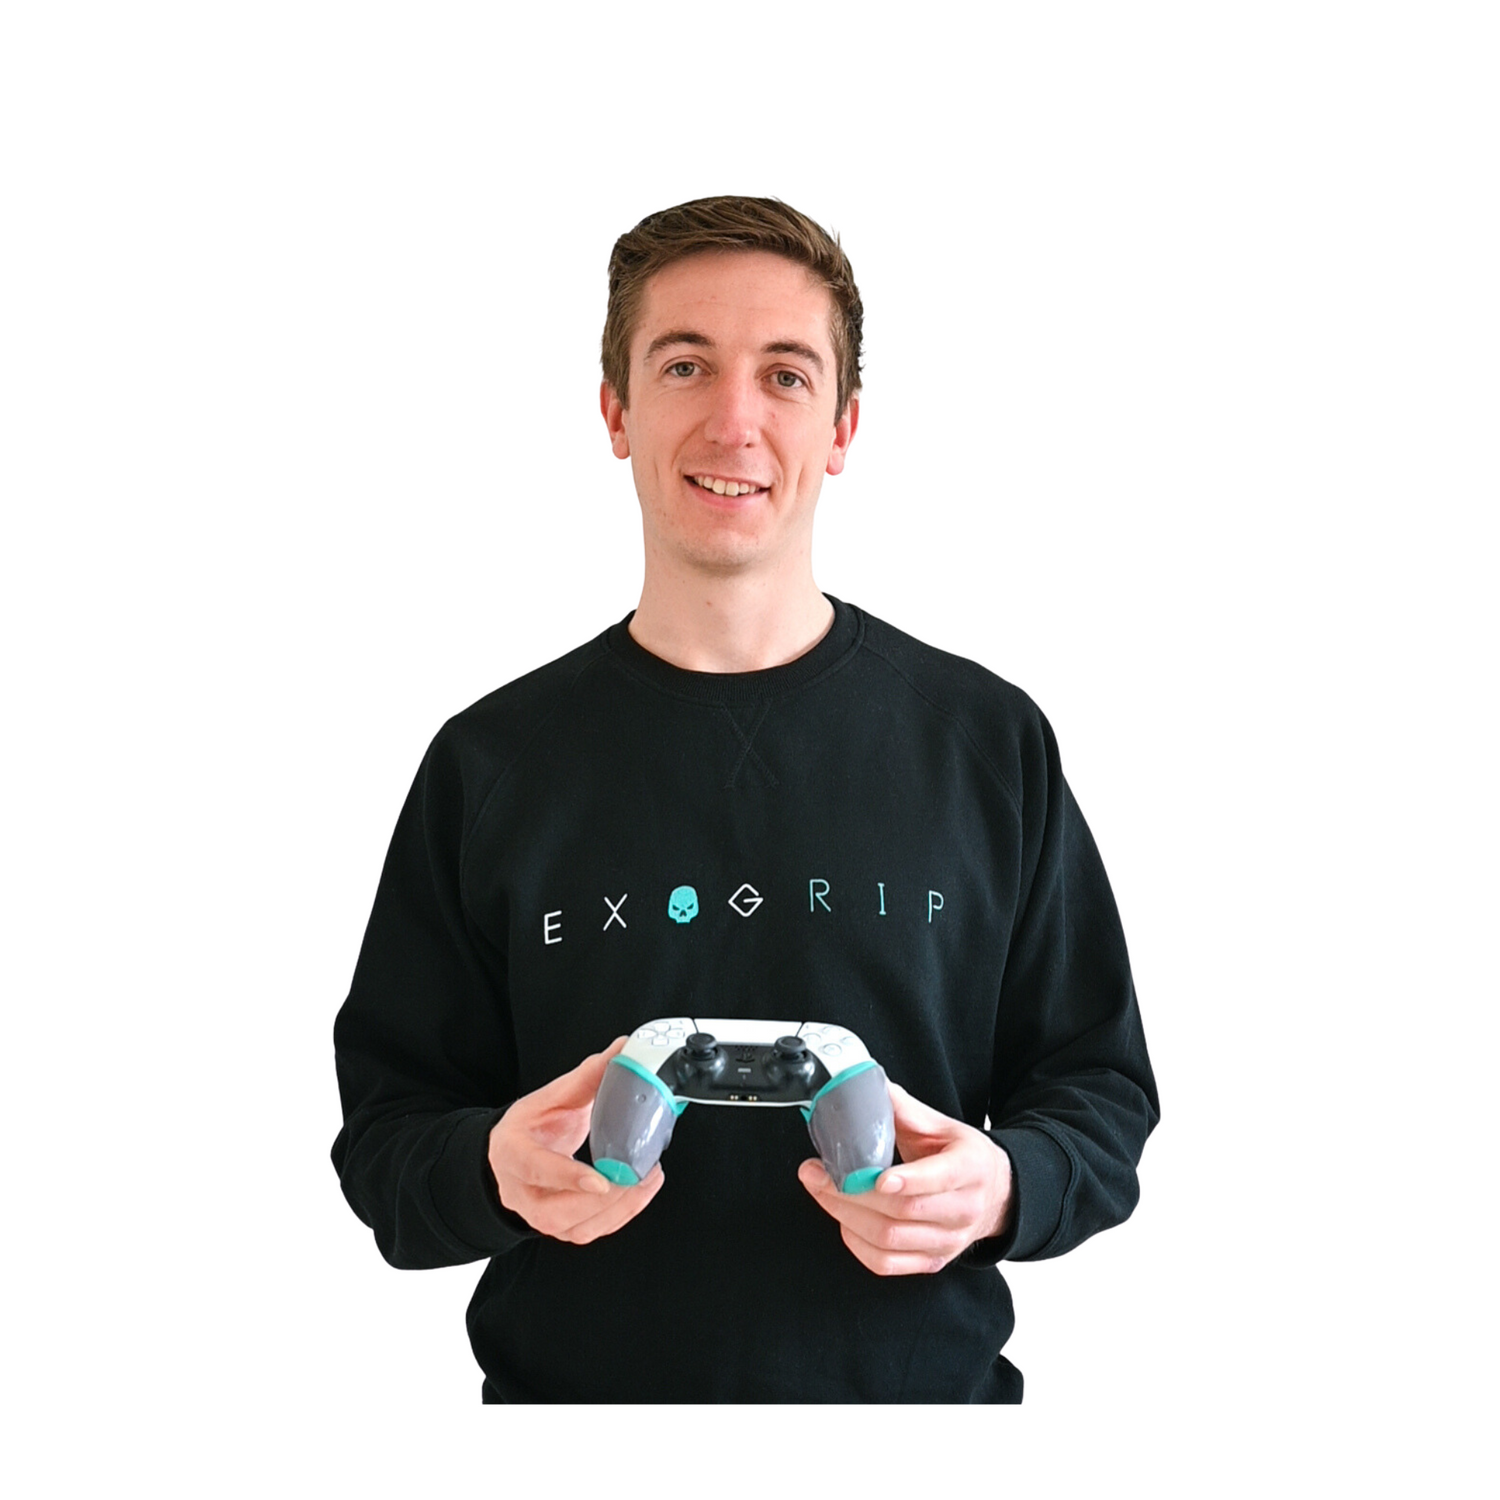 Sam Coombes, gaming enthusiast and founder of Exogrip.